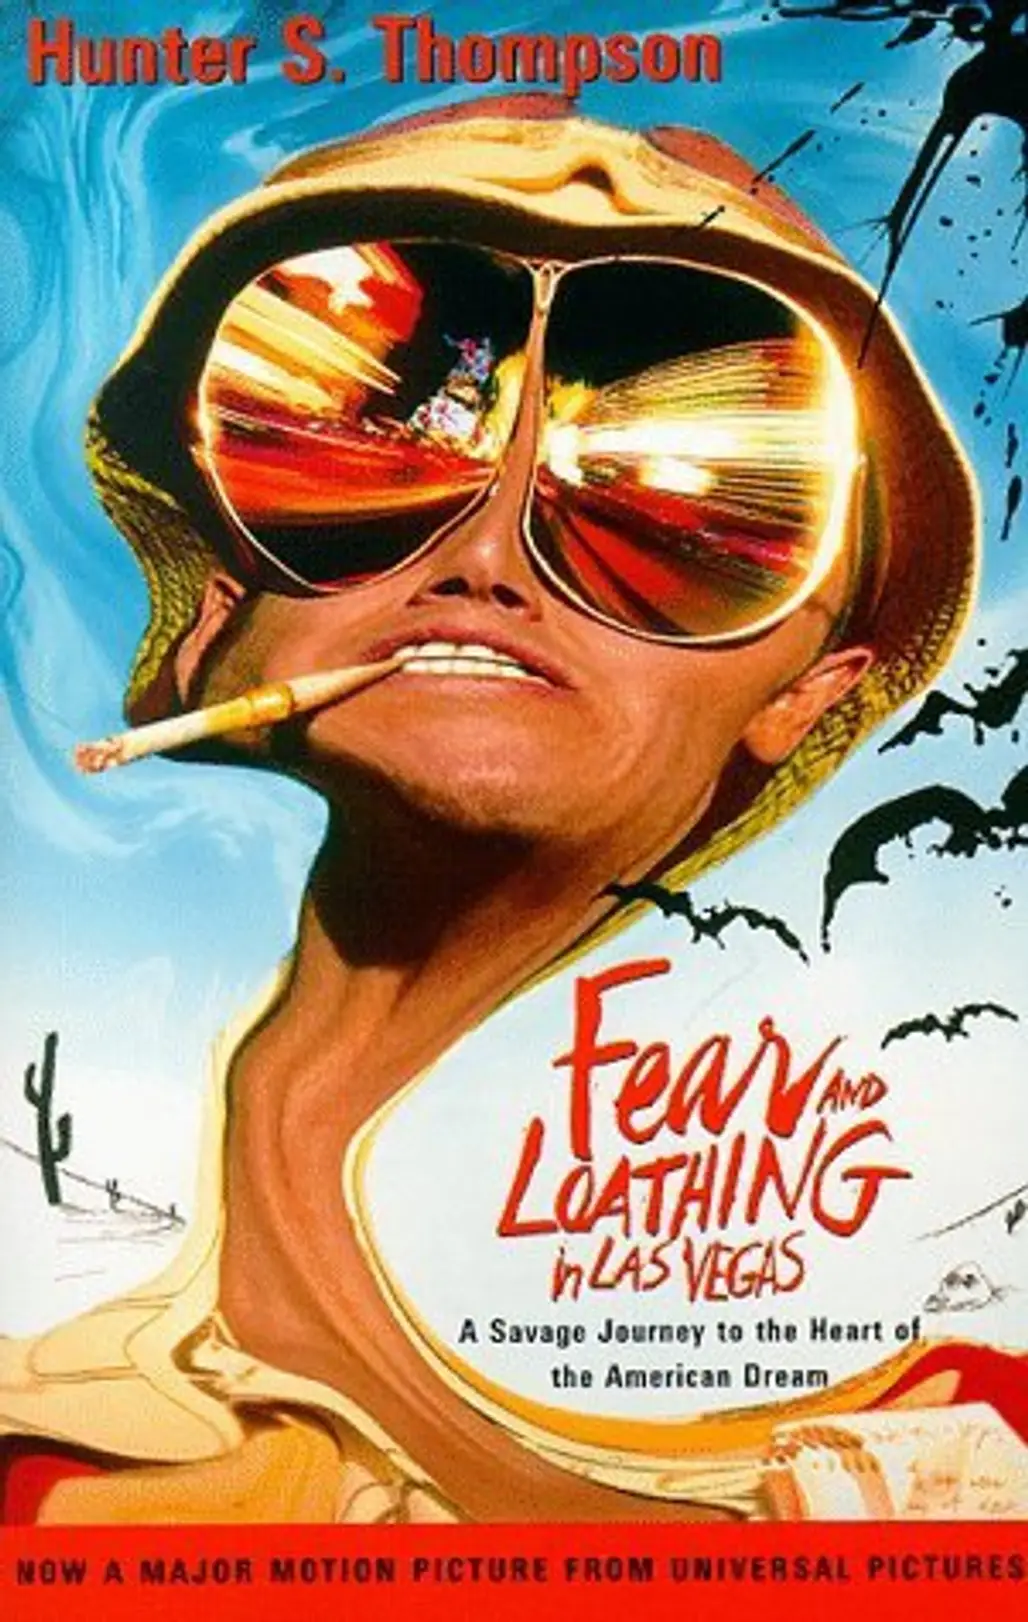 Fear and Loathing in Las Vegas: a Savage Journey to the Heart of the American Dream by Hunter S. Thompson